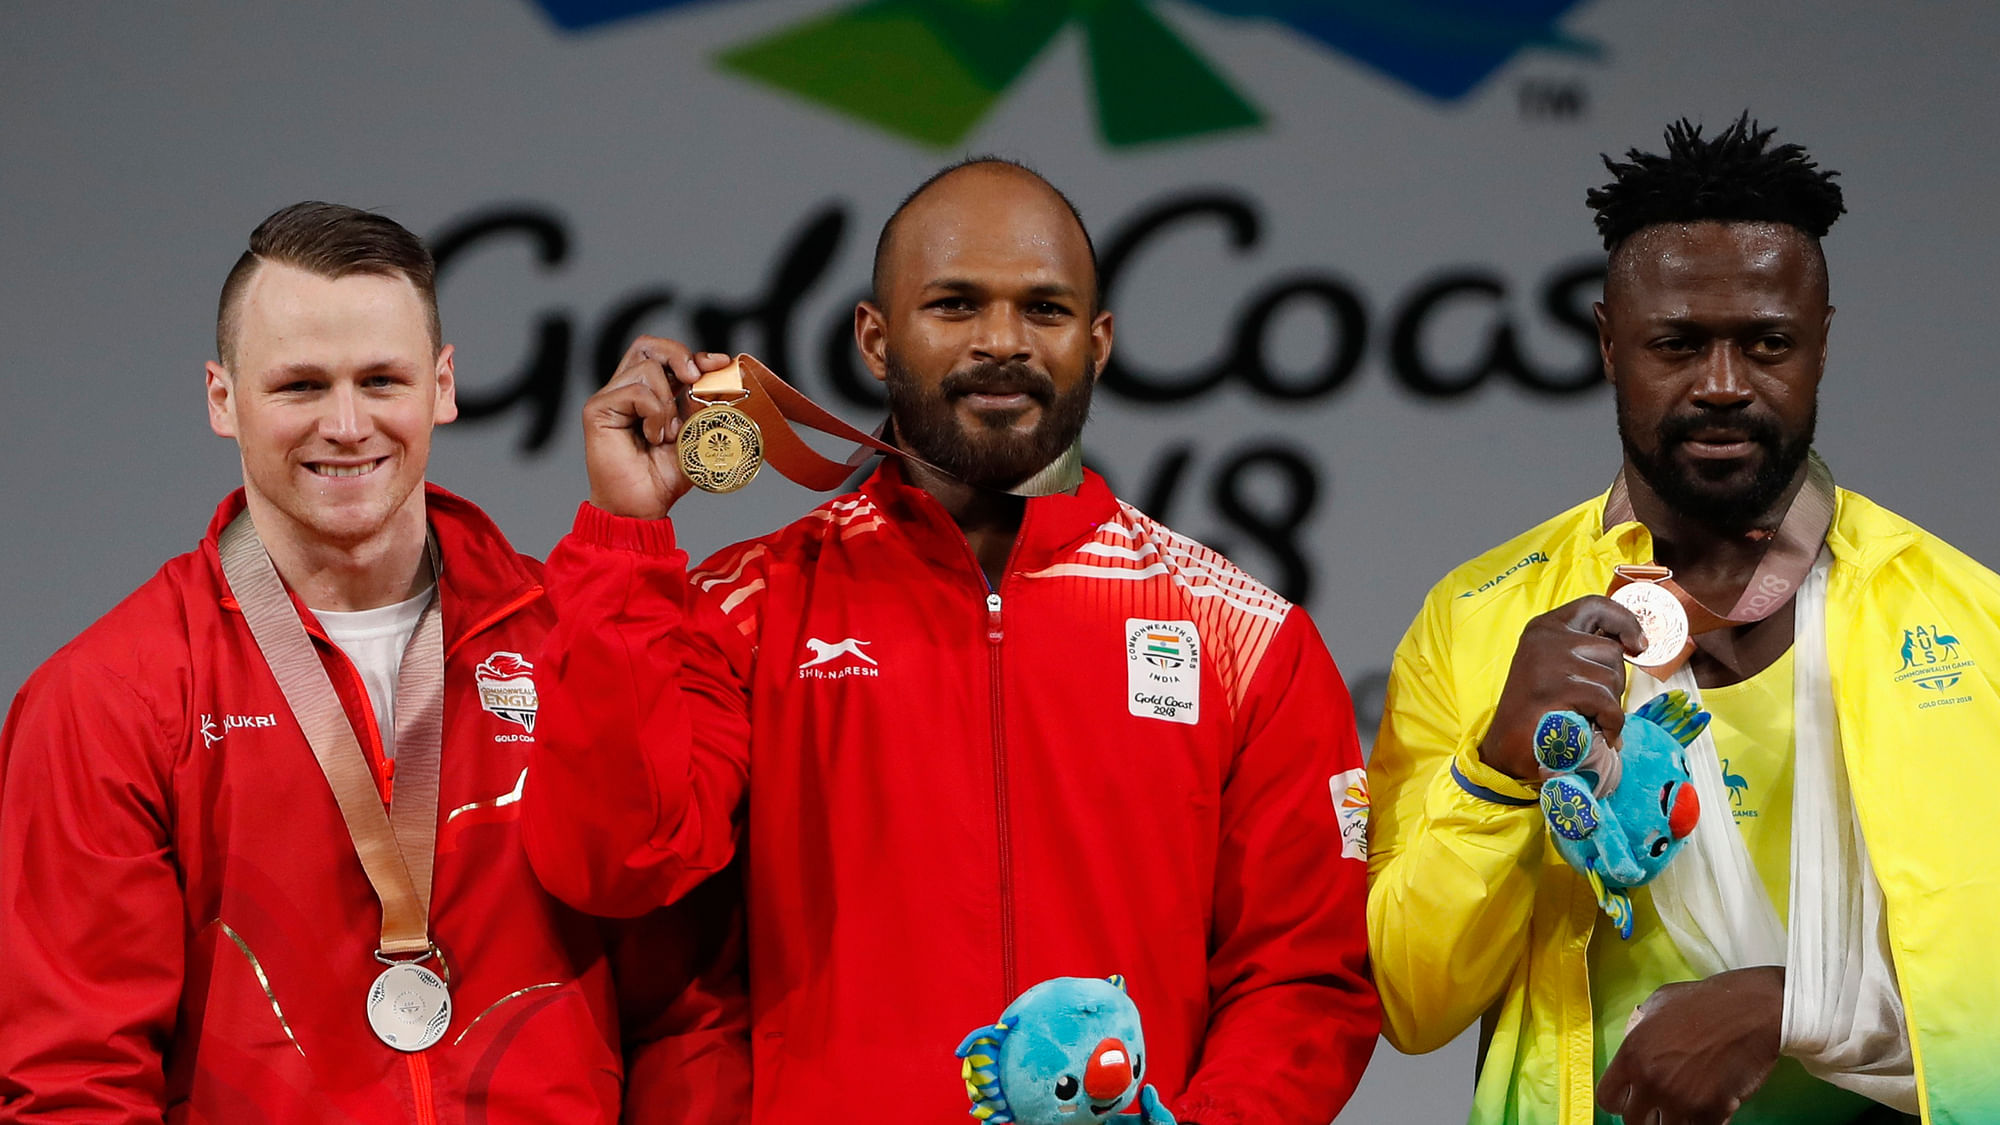 Gold medallist Sathish Sivalingam of India, silver medallist Jack Oliver of England and bronze medallist Francois Etoundi of Australia pose with their medals and Borobi plush doll.&nbsp;